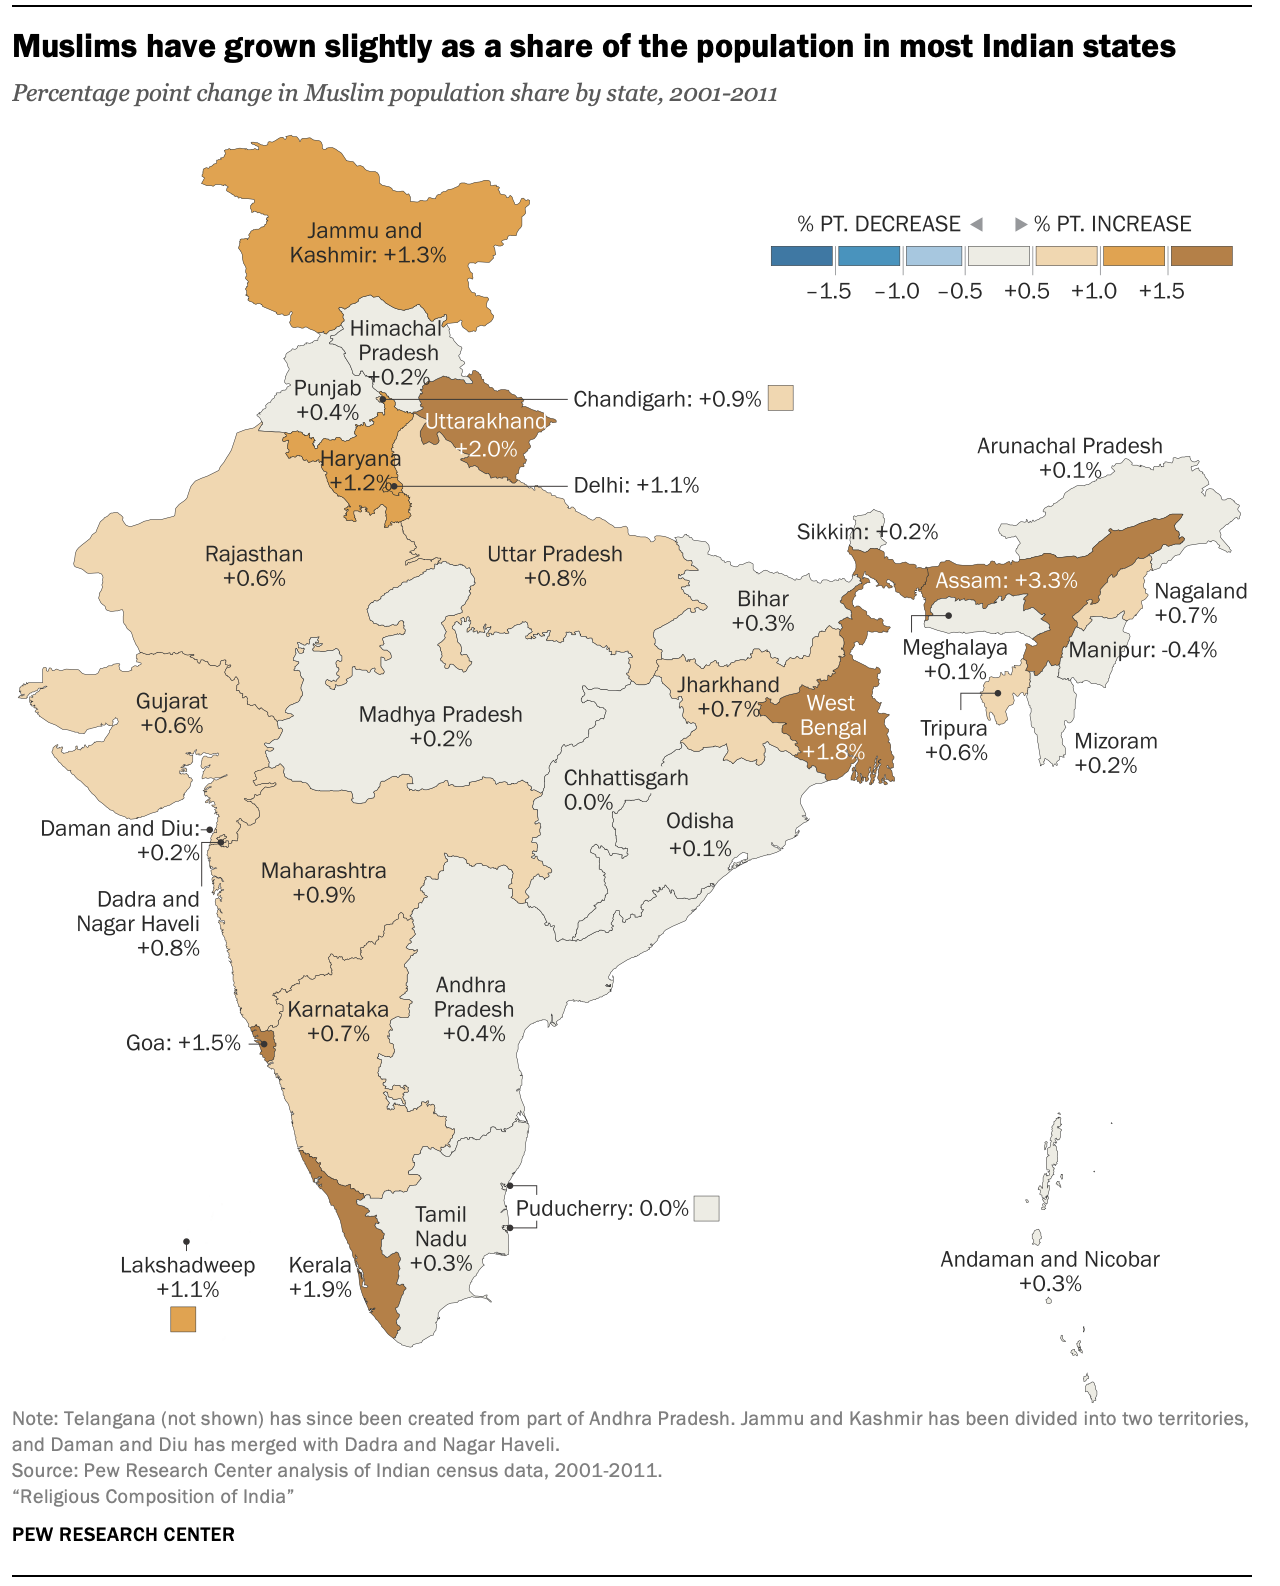 Muslims have grown slightly as a share of the population in most Indian states